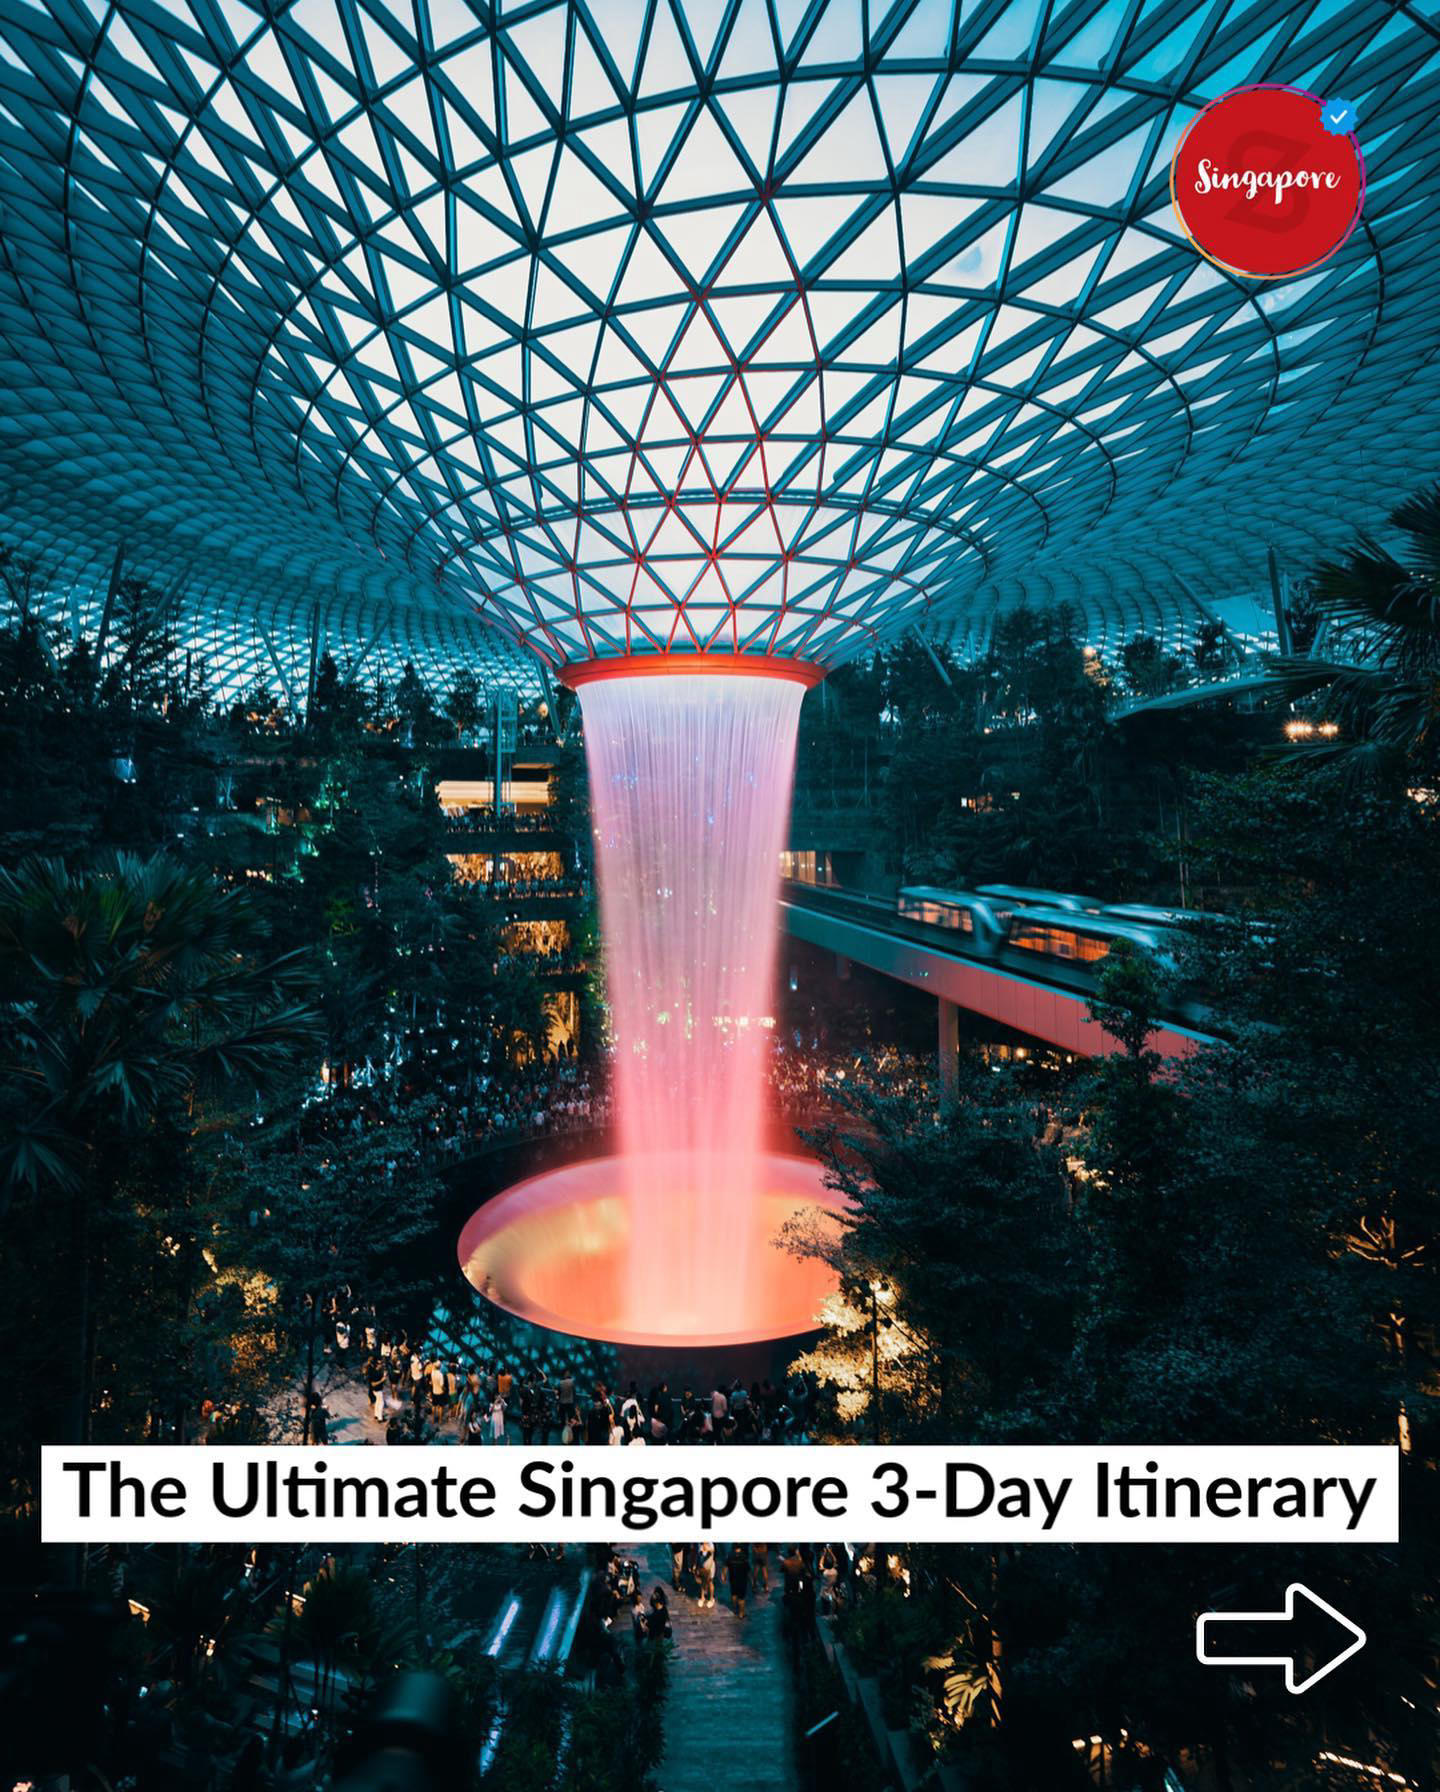 image  1 Singapore 🇸🇬 Travel | Hotels | Food | Tips - Discover Singapore in 3 days and upgrade your experie